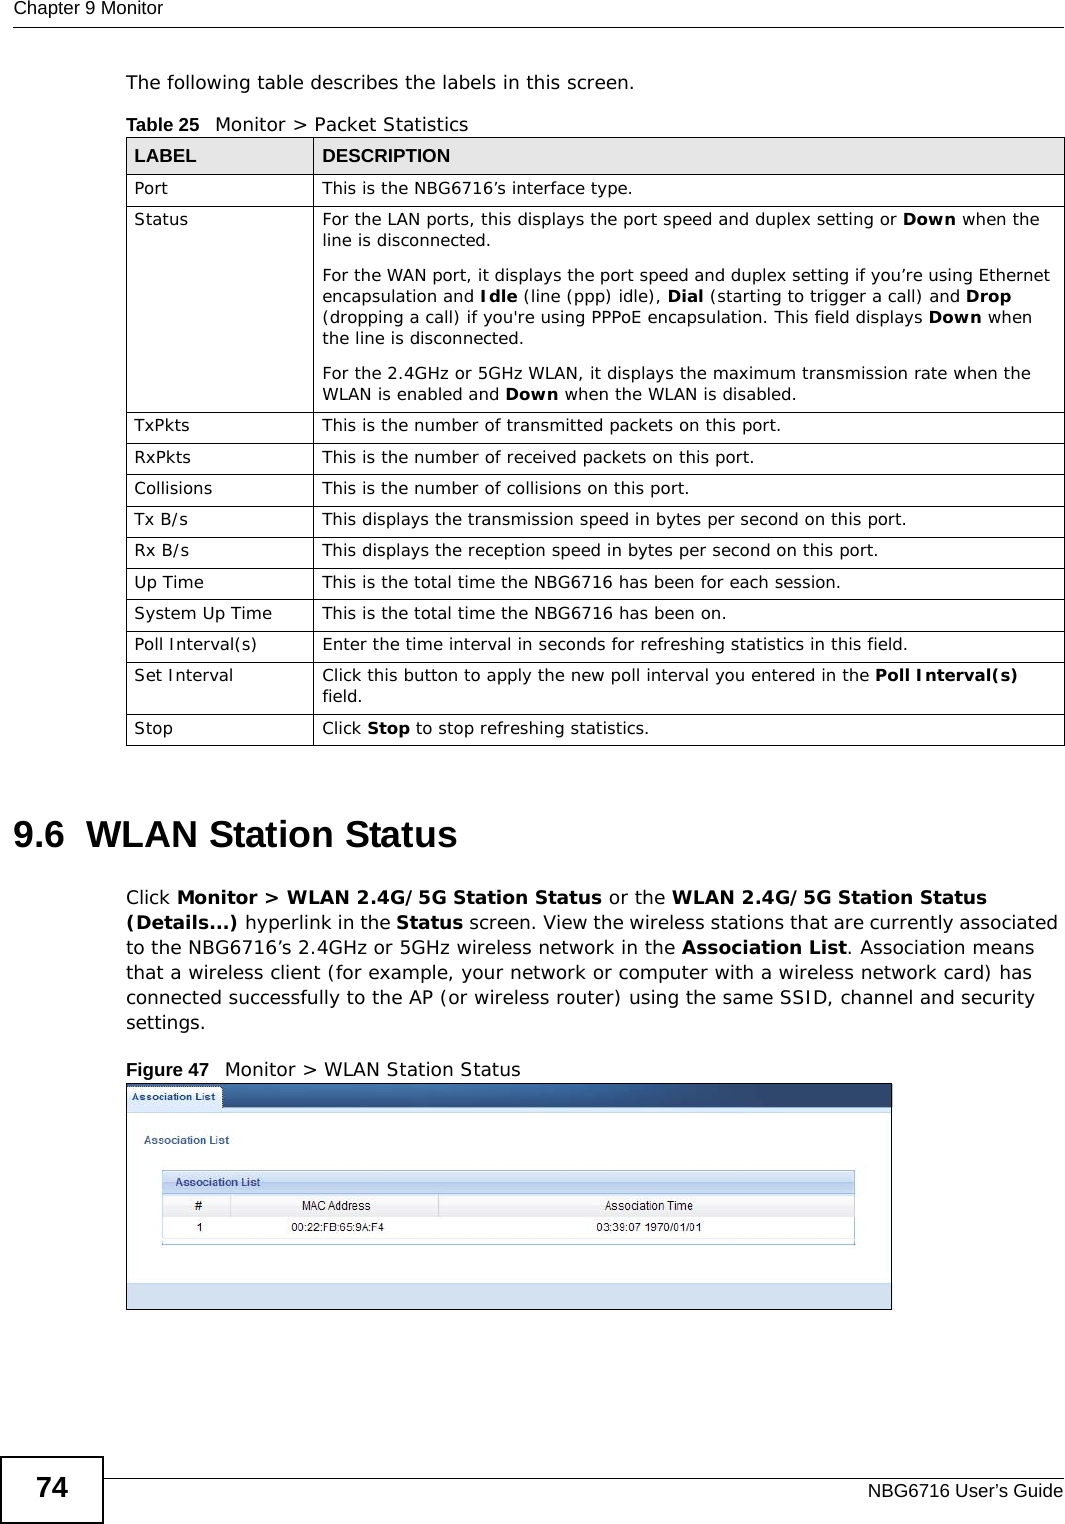 Chapter 9 MonitorNBG6716 User’s Guide74The following table describes the labels in this screen.9.6  WLAN Station Status     Click Monitor &gt; WLAN 2.4G/5G Station Status or the WLAN 2.4G/5G Station Status (Details...) hyperlink in the Status screen. View the wireless stations that are currently associated to the NBG6716’s 2.4GHz or 5GHz wireless network in the Association List. Association means that a wireless client (for example, your network or computer with a wireless network card) has connected successfully to the AP (or wireless router) using the same SSID, channel and security settings.Figure 47   Monitor &gt; WLAN Station Status Table 25   Monitor &gt; Packet StatisticsLABEL DESCRIPTIONPort This is the NBG6716’s interface type.Status  For the LAN ports, this displays the port speed and duplex setting or Down when the line is disconnected.For the WAN port, it displays the port speed and duplex setting if you’re using Ethernet encapsulation and Idle (line (ppp) idle), Dial (starting to trigger a call) and Drop (dropping a call) if you&apos;re using PPPoE encapsulation. This field displays Down when the line is disconnected.For the 2.4GHz or 5GHz WLAN, it displays the maximum transmission rate when the WLAN is enabled and Down when the WLAN is disabled.TxPkts  This is the number of transmitted packets on this port.RxPkts  This is the number of received packets on this port.Collisions  This is the number of collisions on this port.Tx B/s  This displays the transmission speed in bytes per second on this port.Rx B/s This displays the reception speed in bytes per second on this port.Up Time This is the total time the NBG6716 has been for each session.System Up Time This is the total time the NBG6716 has been on.Poll Interval(s) Enter the time interval in seconds for refreshing statistics in this field.Set Interval Click this button to apply the new poll interval you entered in the Poll Interval(s) field.Stop Click Stop to stop refreshing statistics.